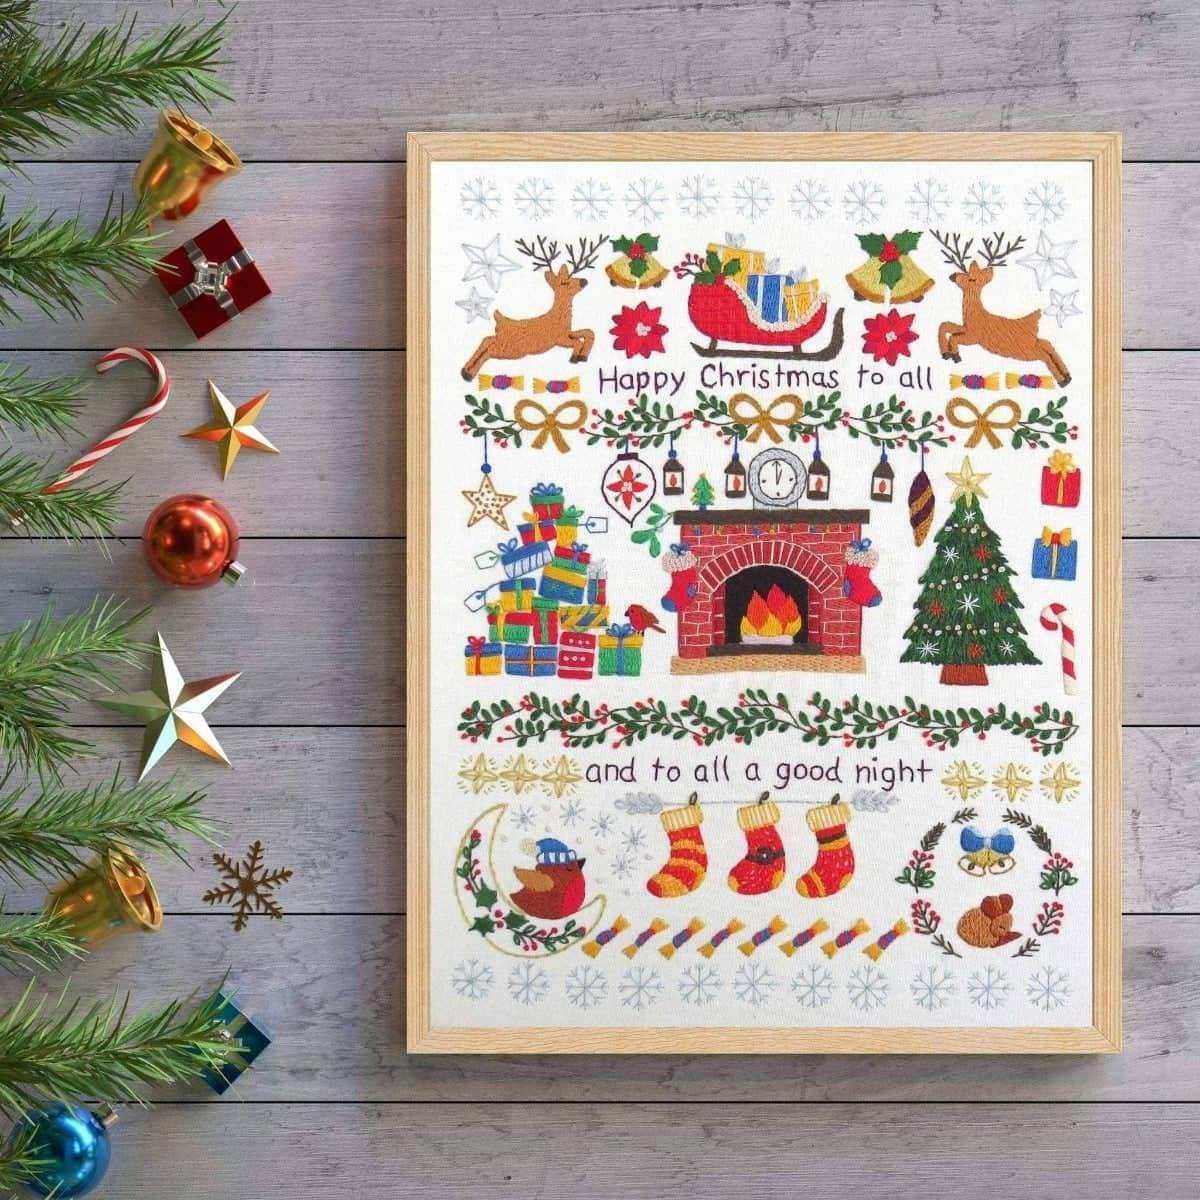 Night Before Christmas Hand Embroidery Kit , Embroidery Kit , StitchDoodles , christmas, embroidery hoop kit, embroidery kit for adults, embroidery kit for beginers, embroidery kits for beginners, hand embroidery , StitchDoodles , shop.stitchdoodles.com